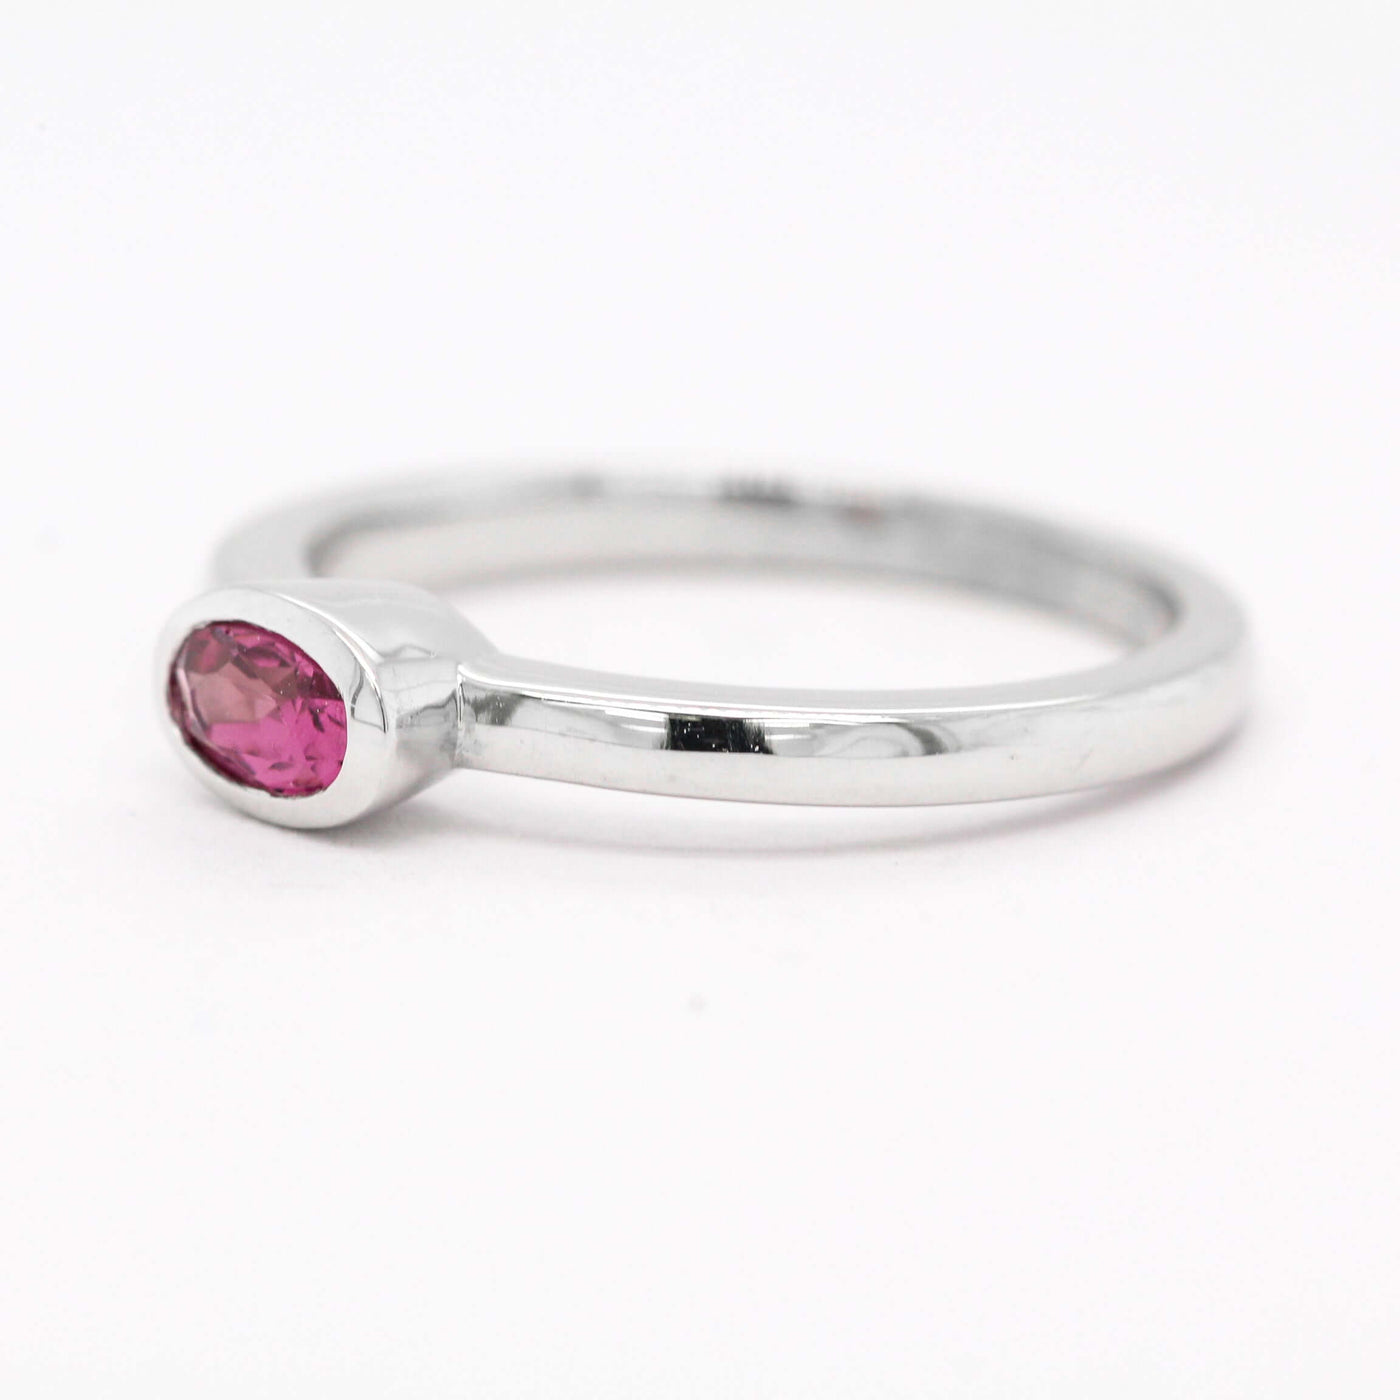 14KW .30 CT OVAL PINK TOURMALINE RING